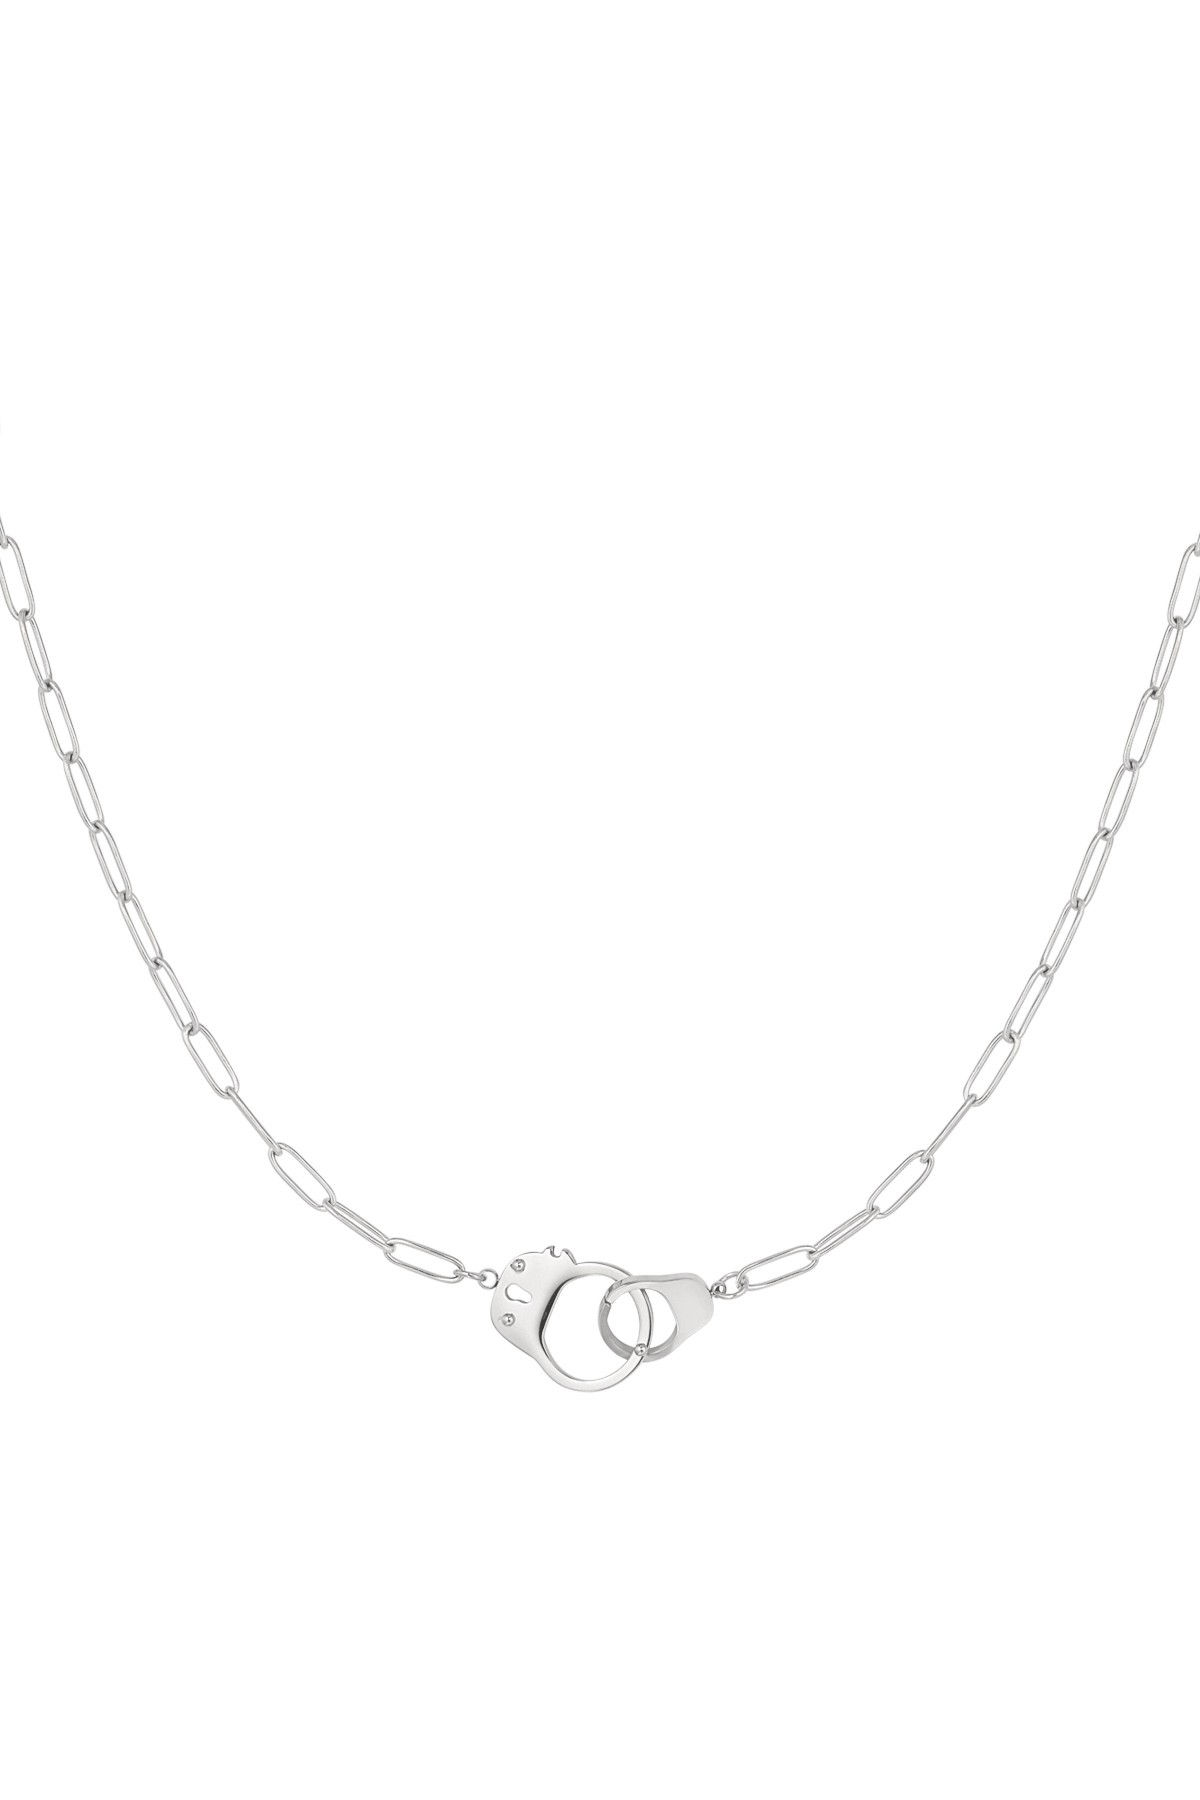 Link chain connected charm - silver